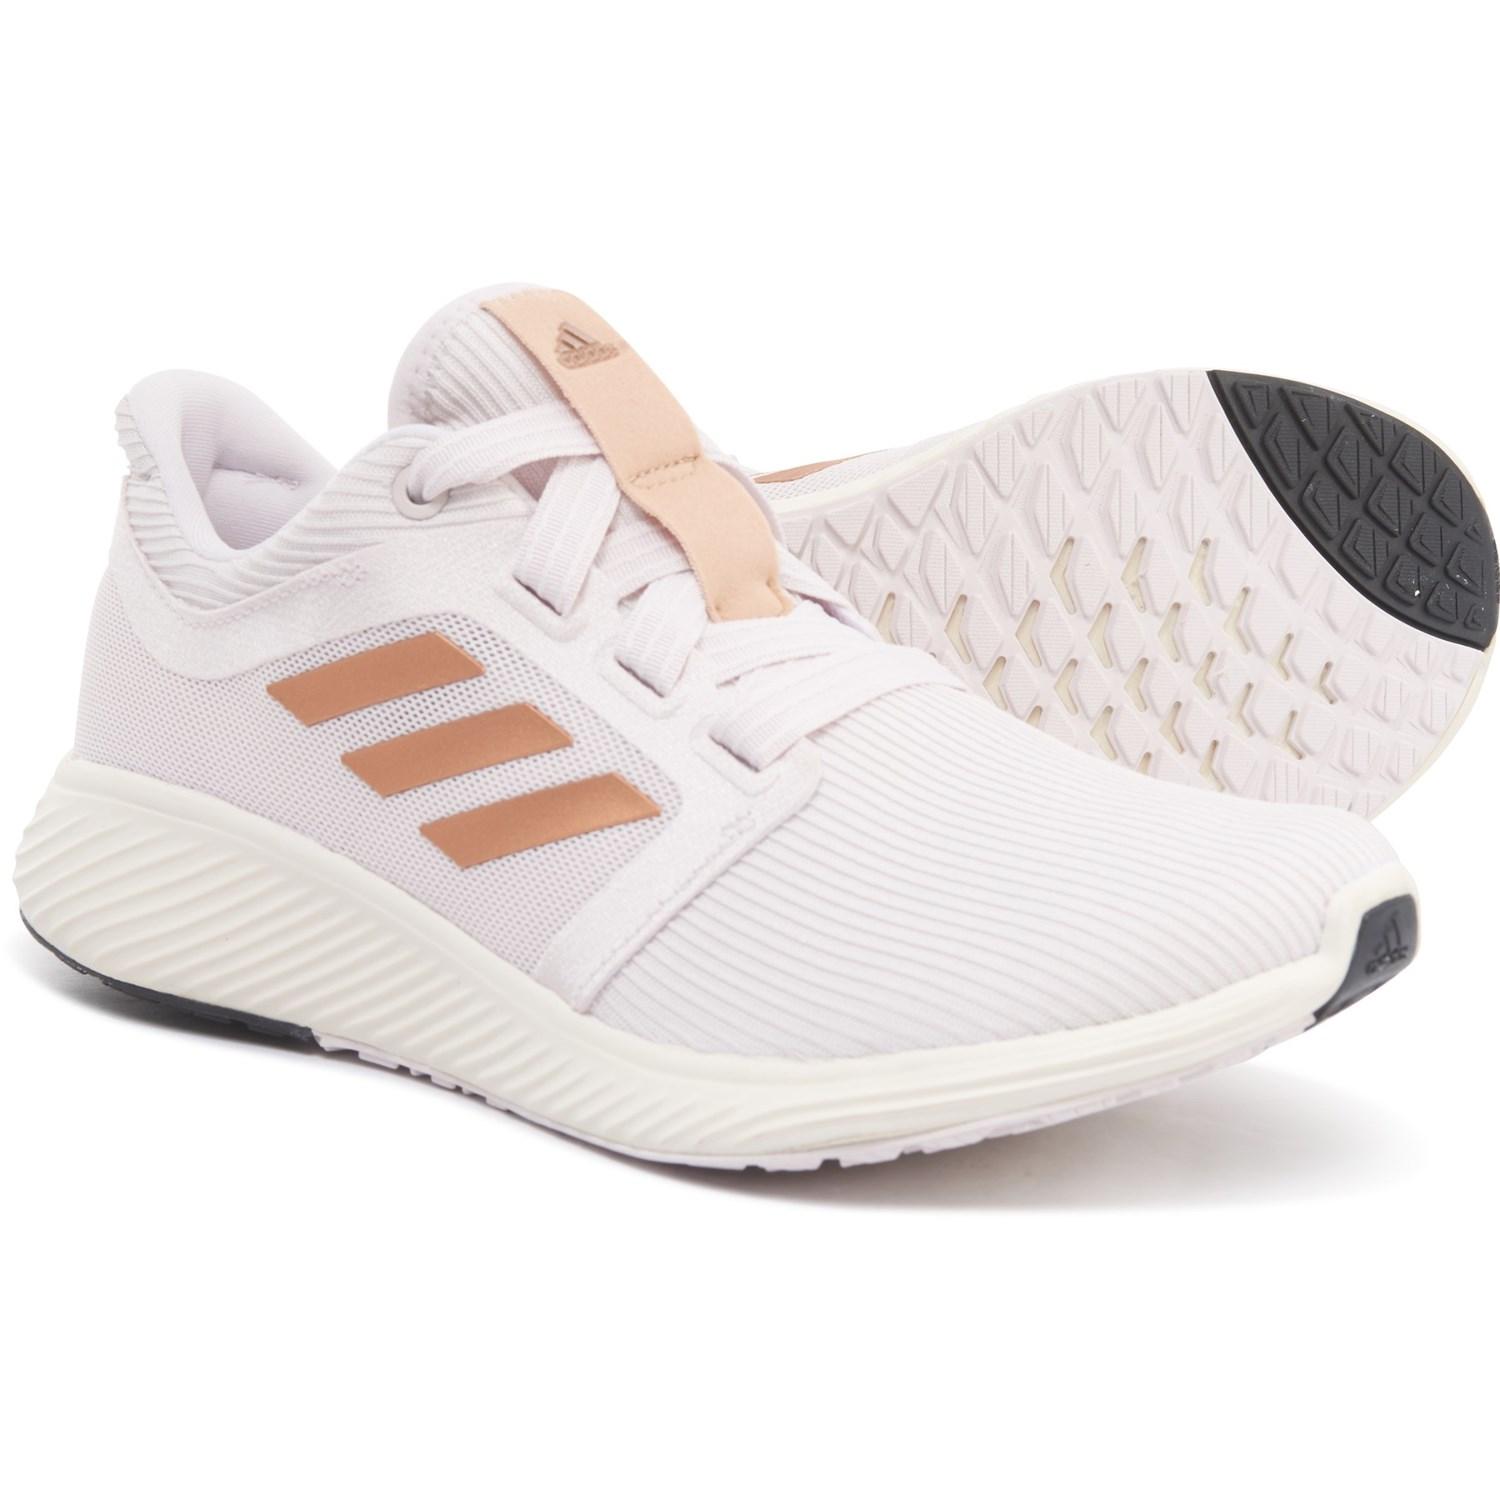 adidas Edge Lux 3 Running Shoes in 